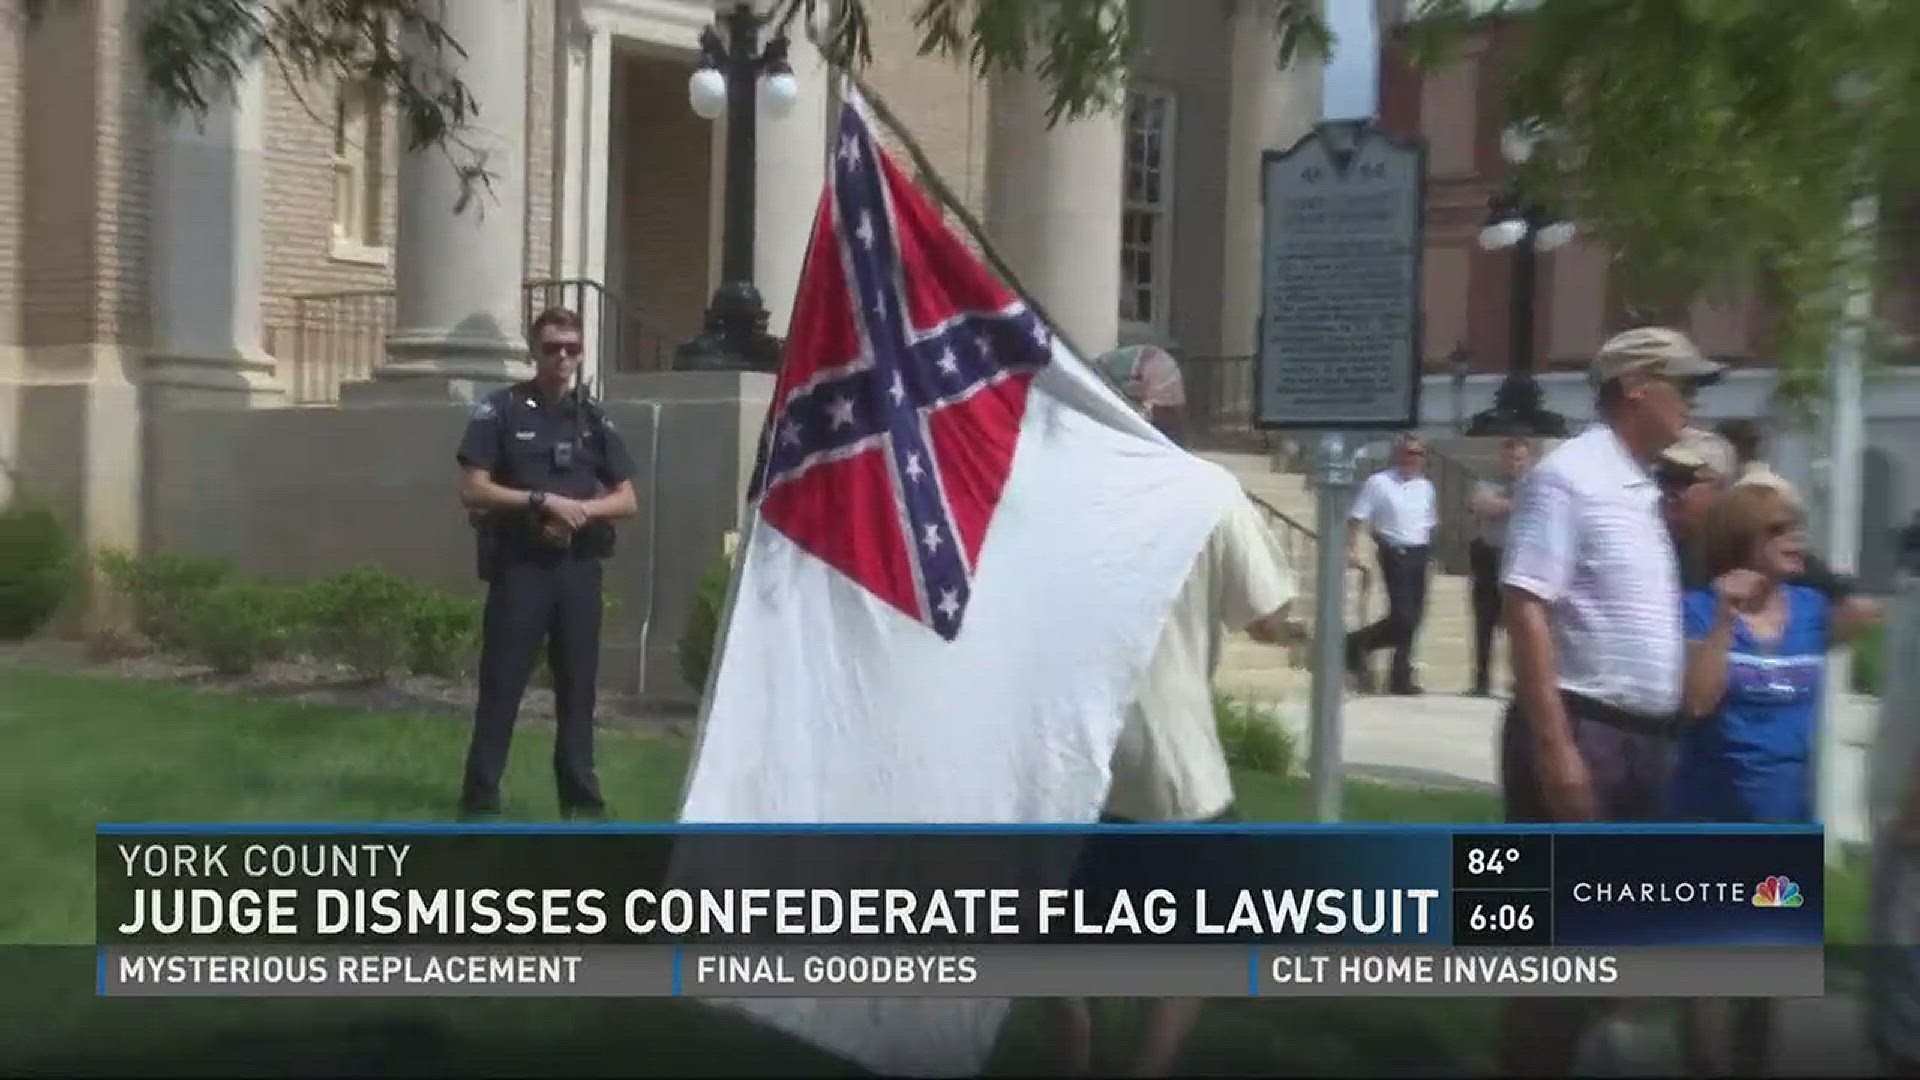 Months after the controversial removal of a confederate flag in a courthouse in York, a judge decided to dismiss a case against the move.